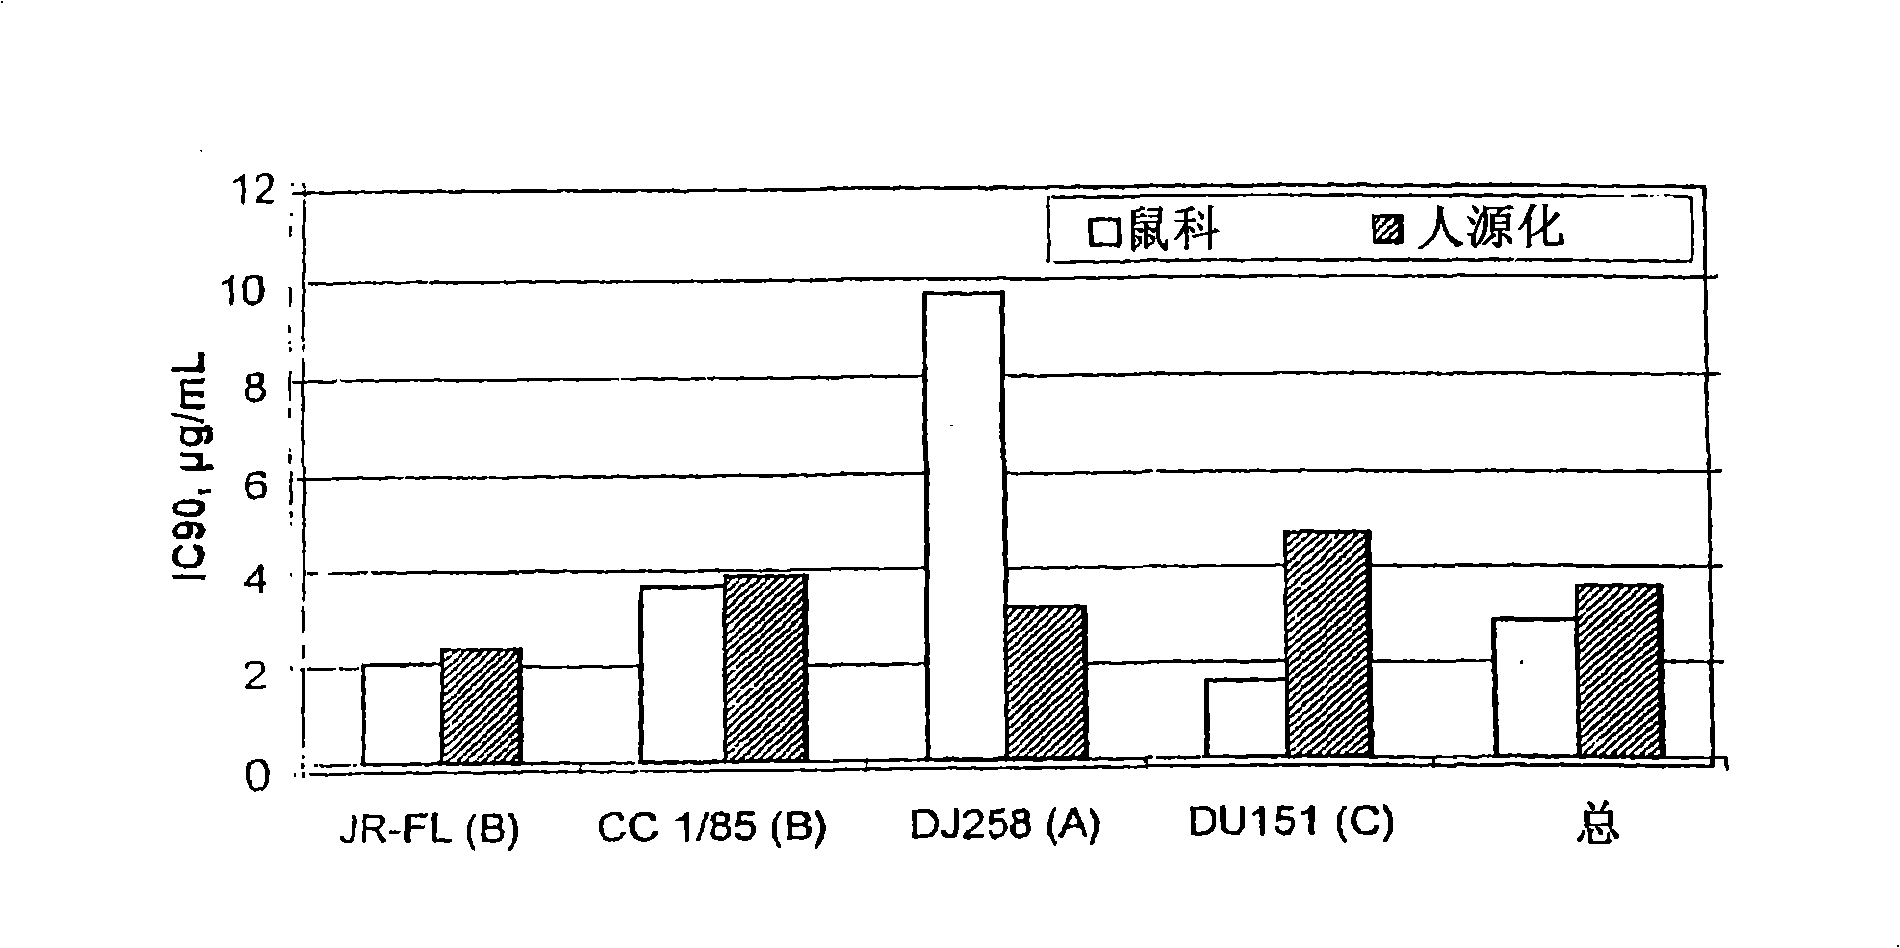 Methods for reducing viral load in hiv-1-infected patients